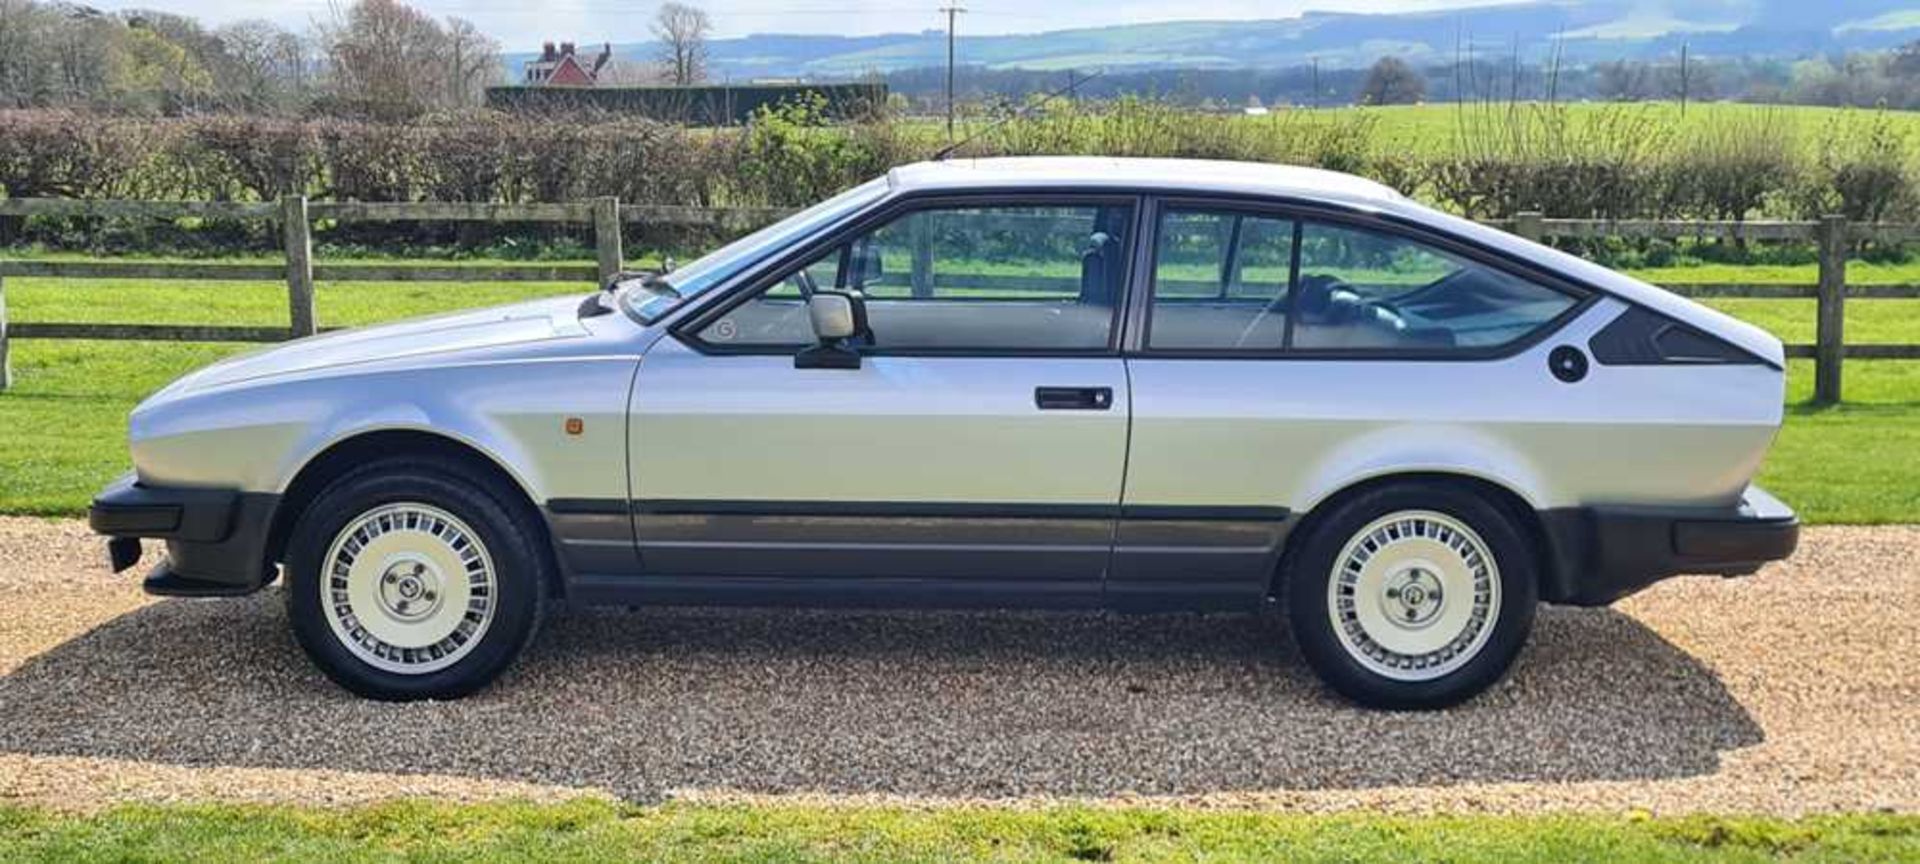 1983 Alfa Romeo GTV 2.0 litre Single family ownership and 48,000 miles from new - Image 18 of 51